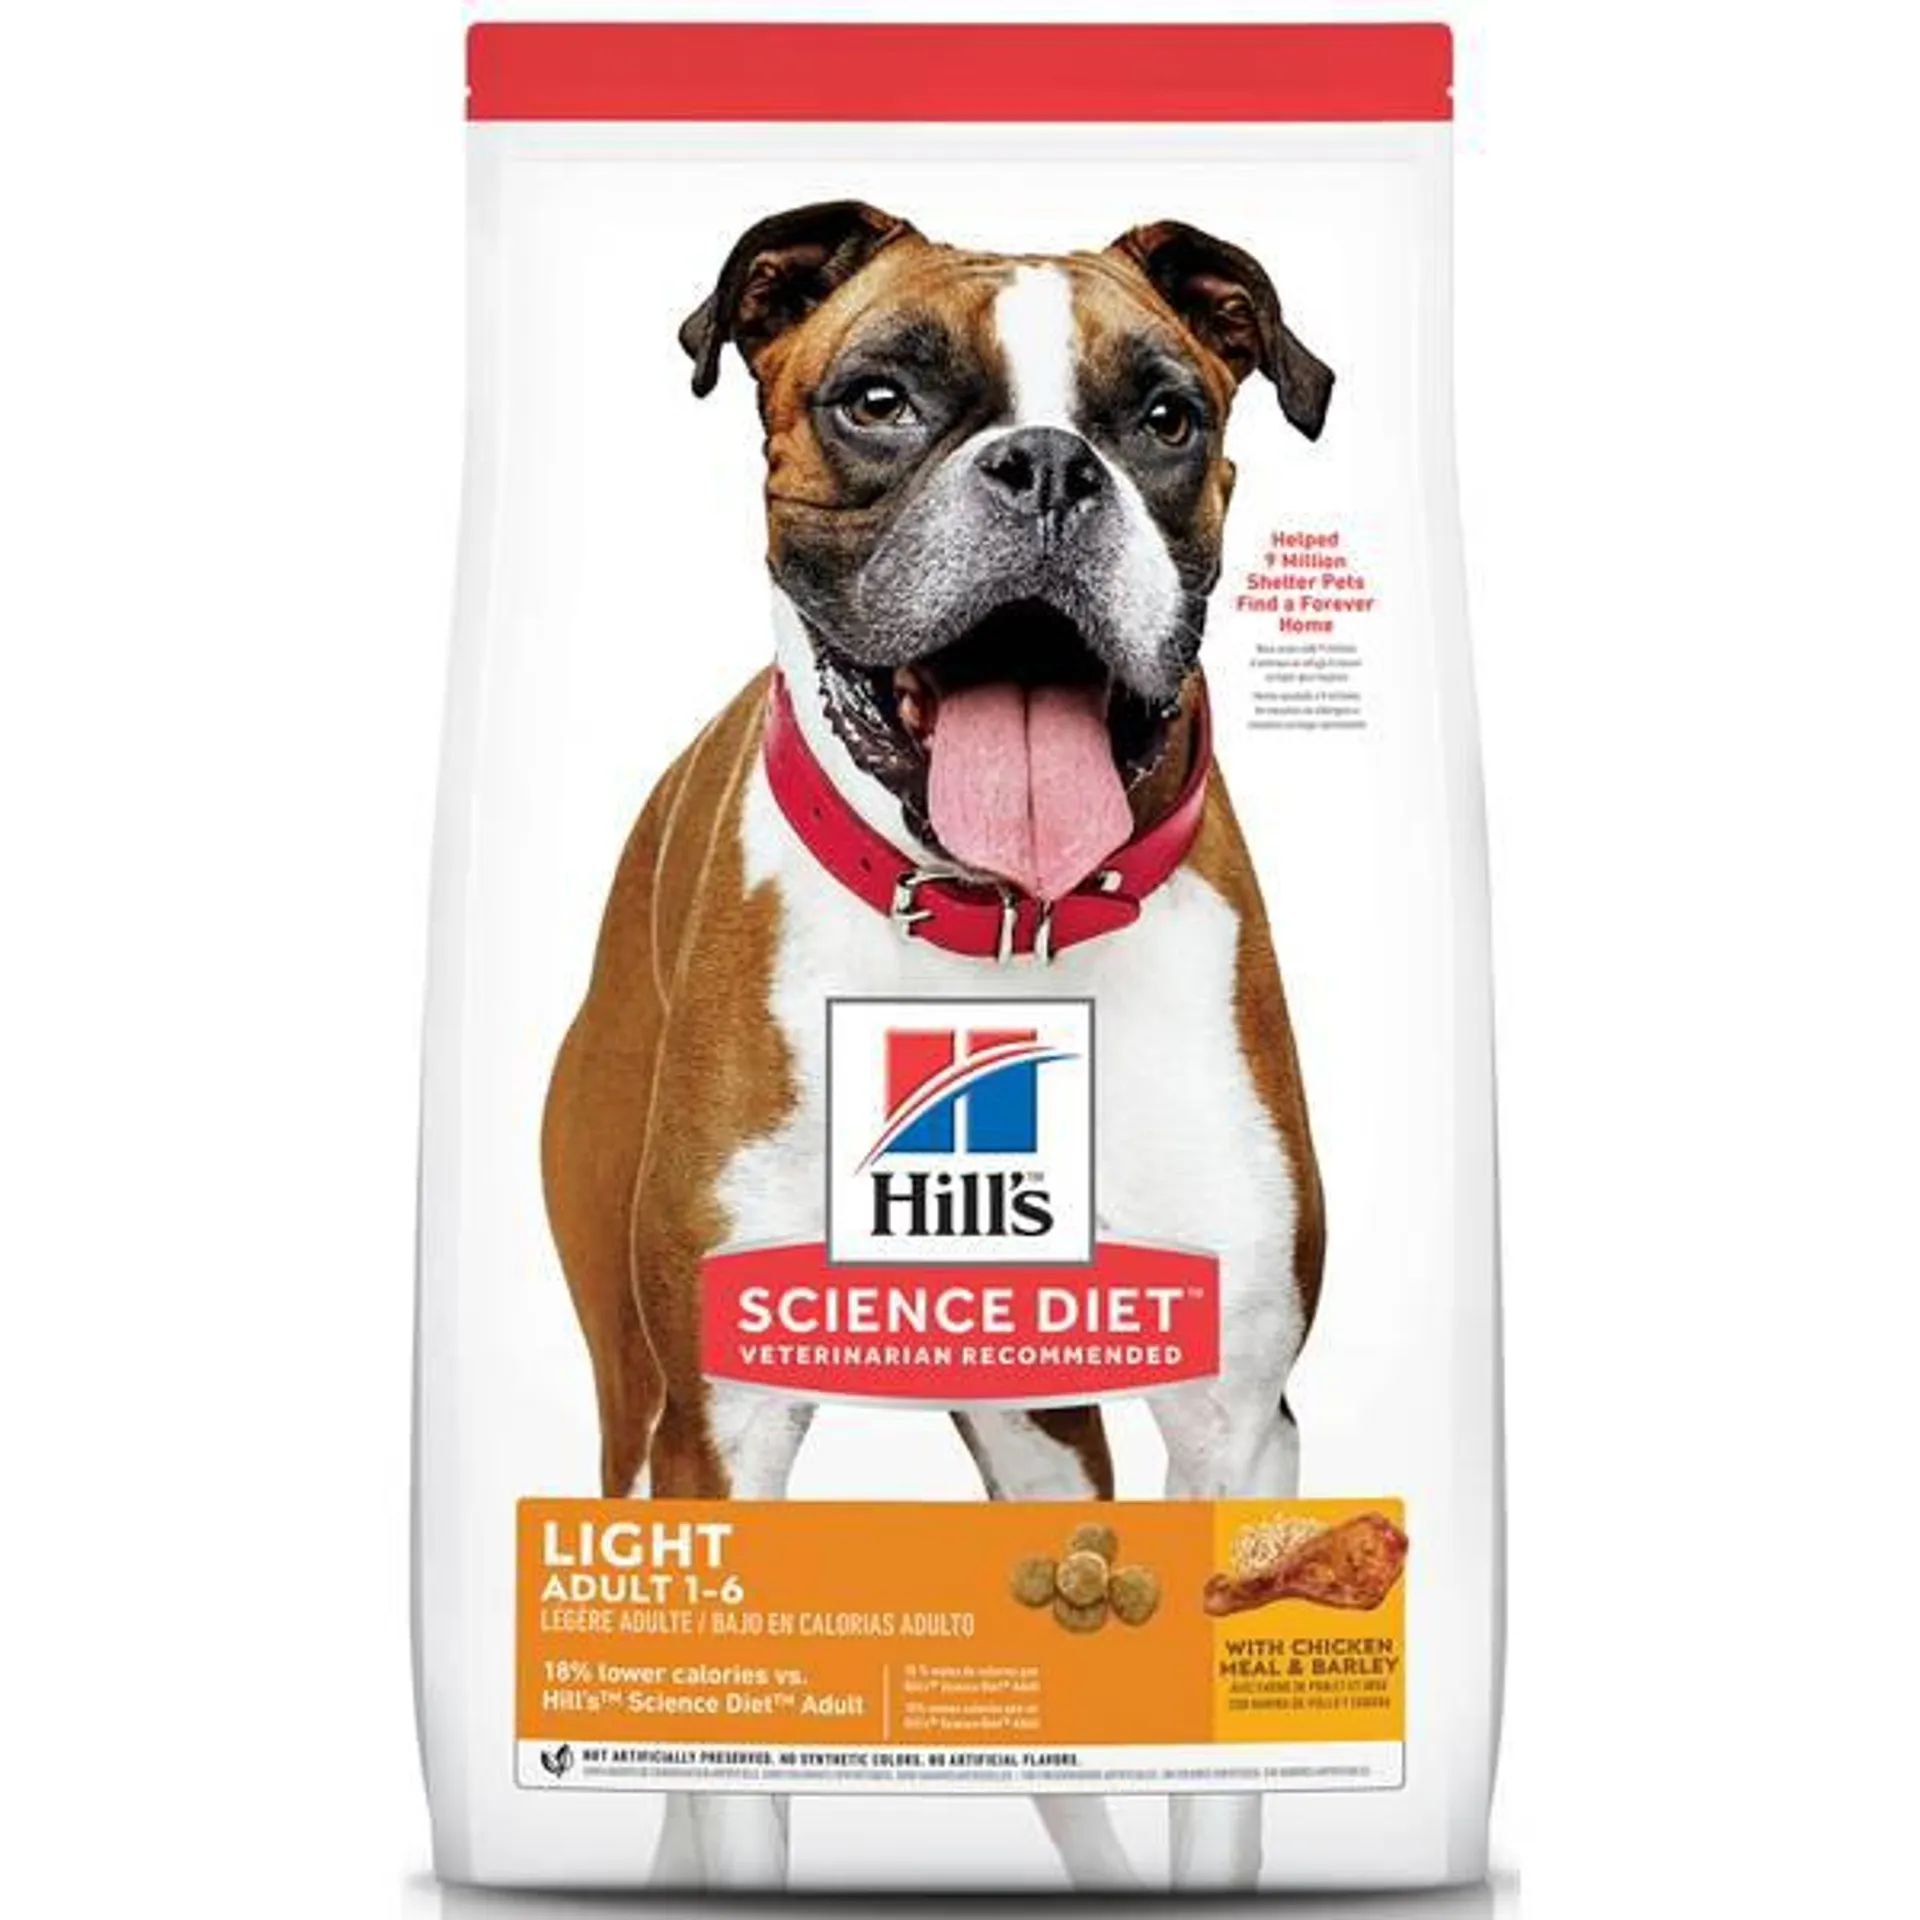 30 lb Adult Light with Chicken Meal & Barley Dry Dog Food